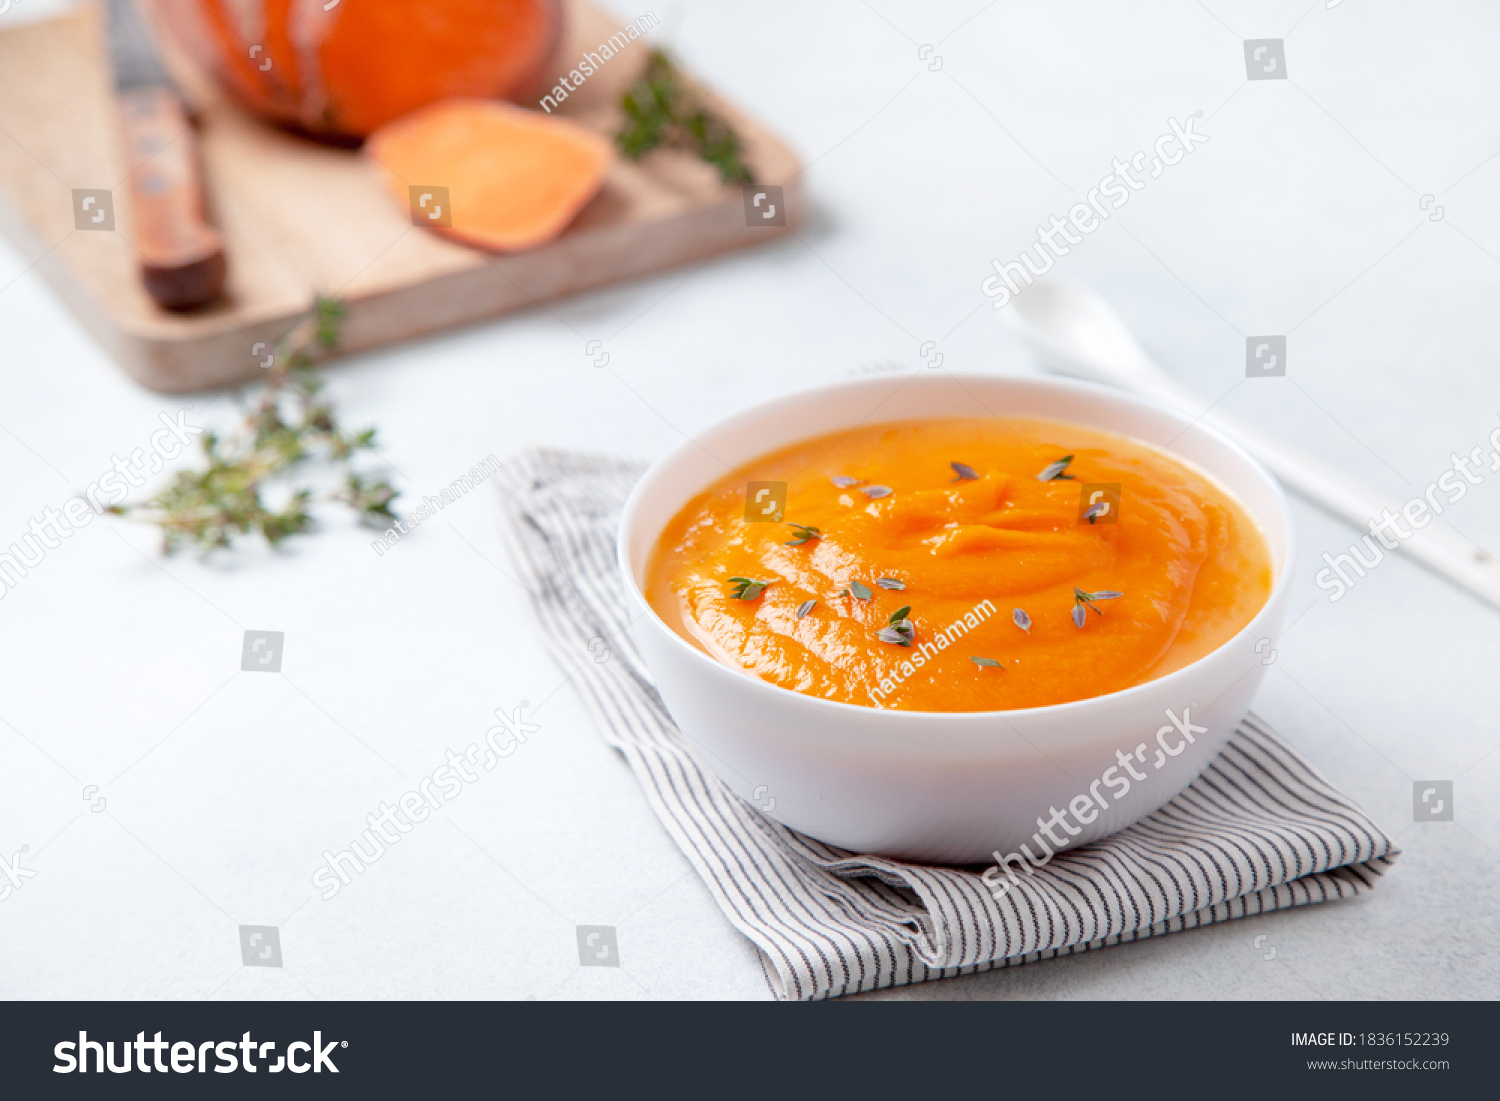 mashed sweet potatoes in a wooden bowl on a light background #1836152239